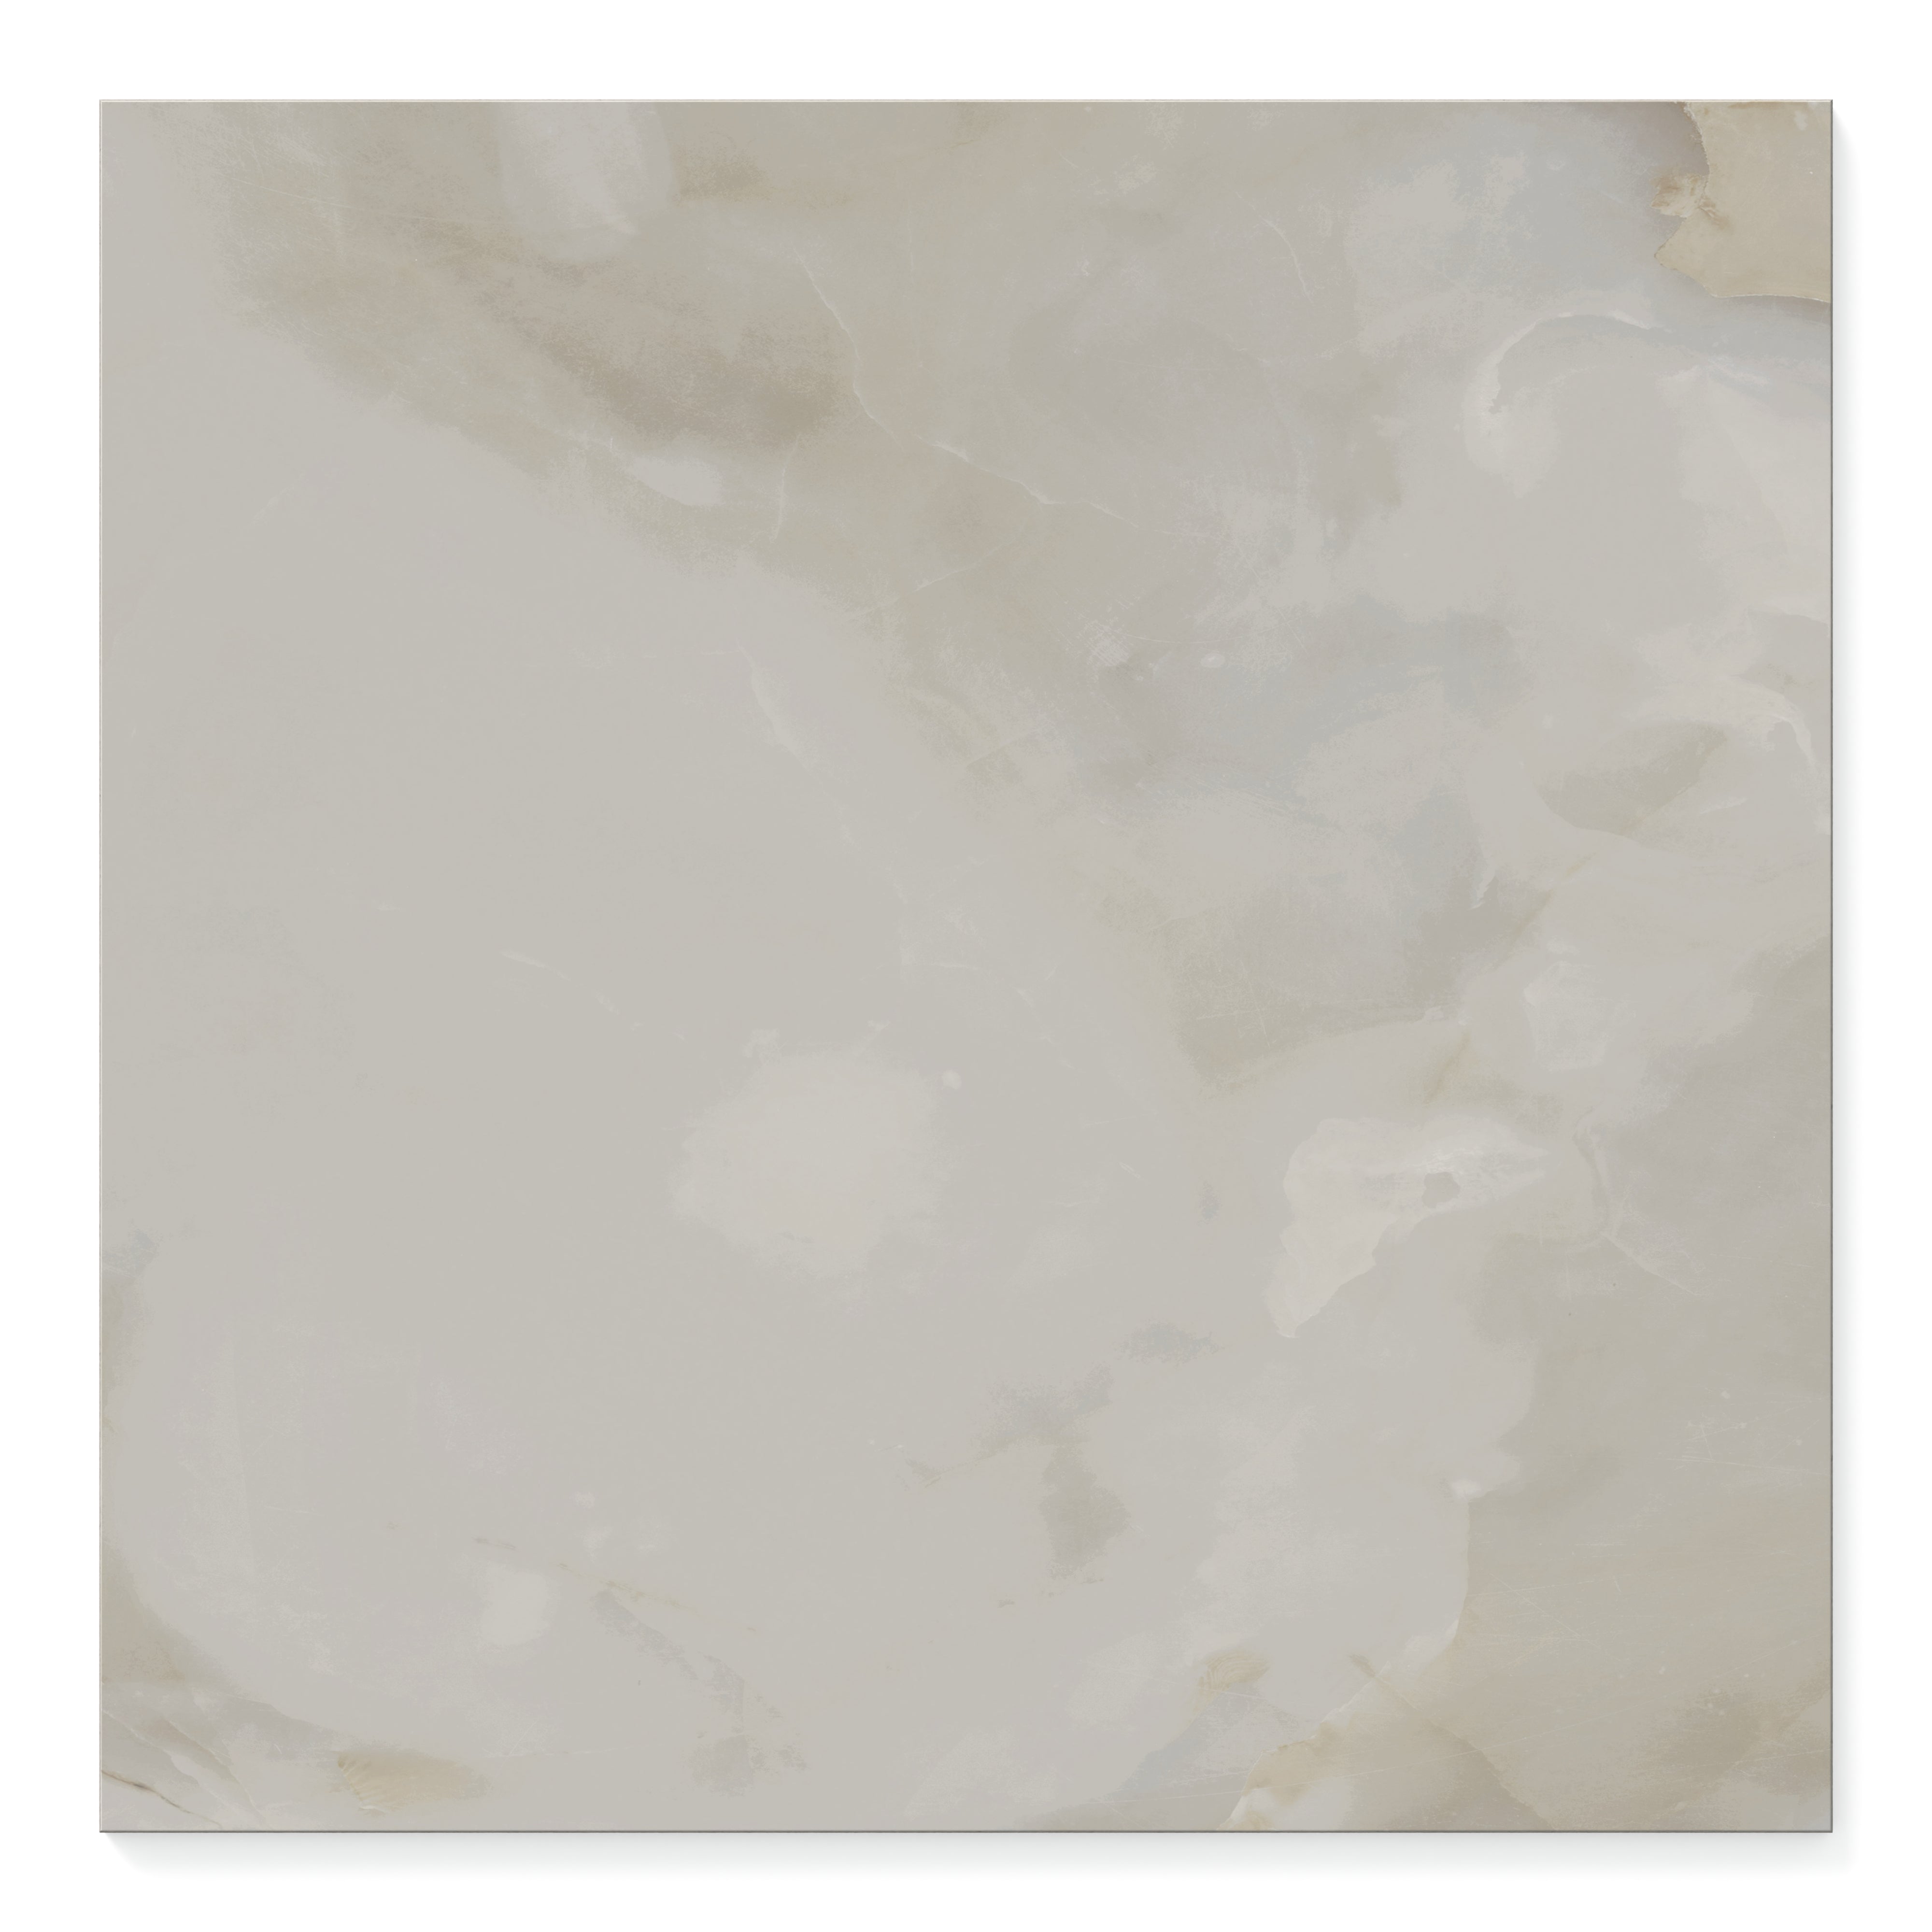 Astrid Oyster porcelain tile showcasing the subtle, natural beauty of onyx.